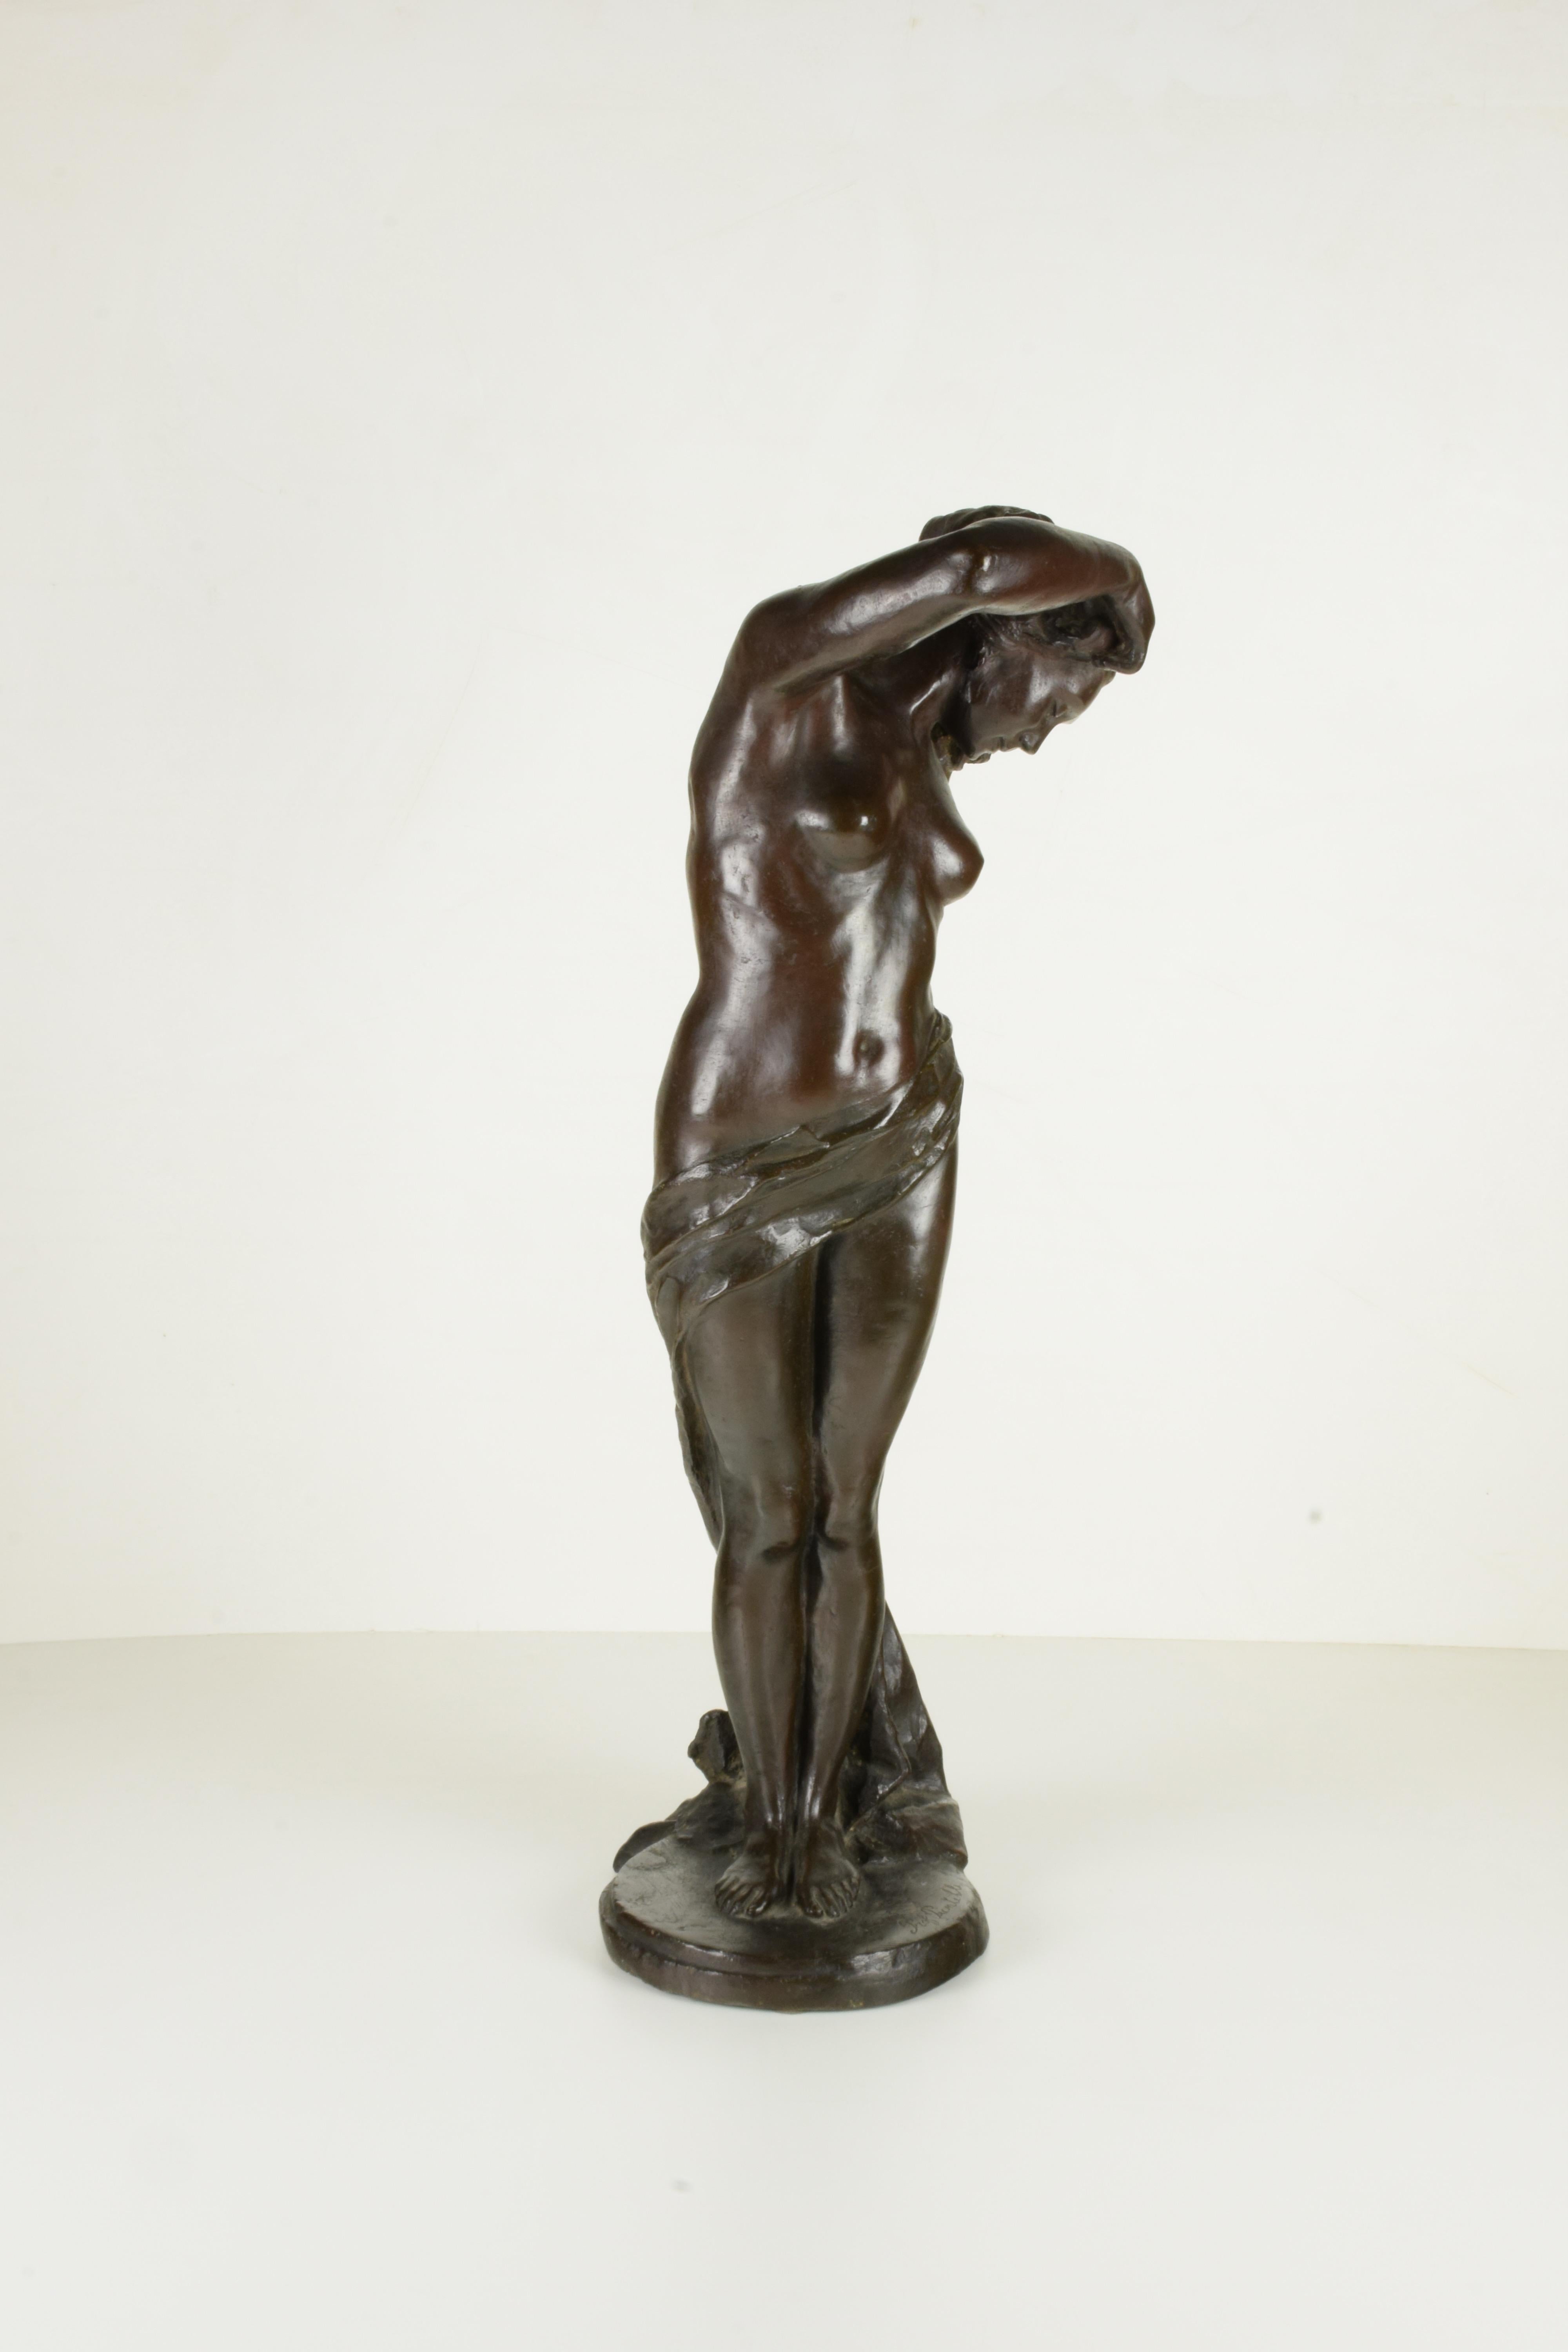 In dark patina bronze 
Signed by Prof. Puntelli 
Measures: Height 75 cm.